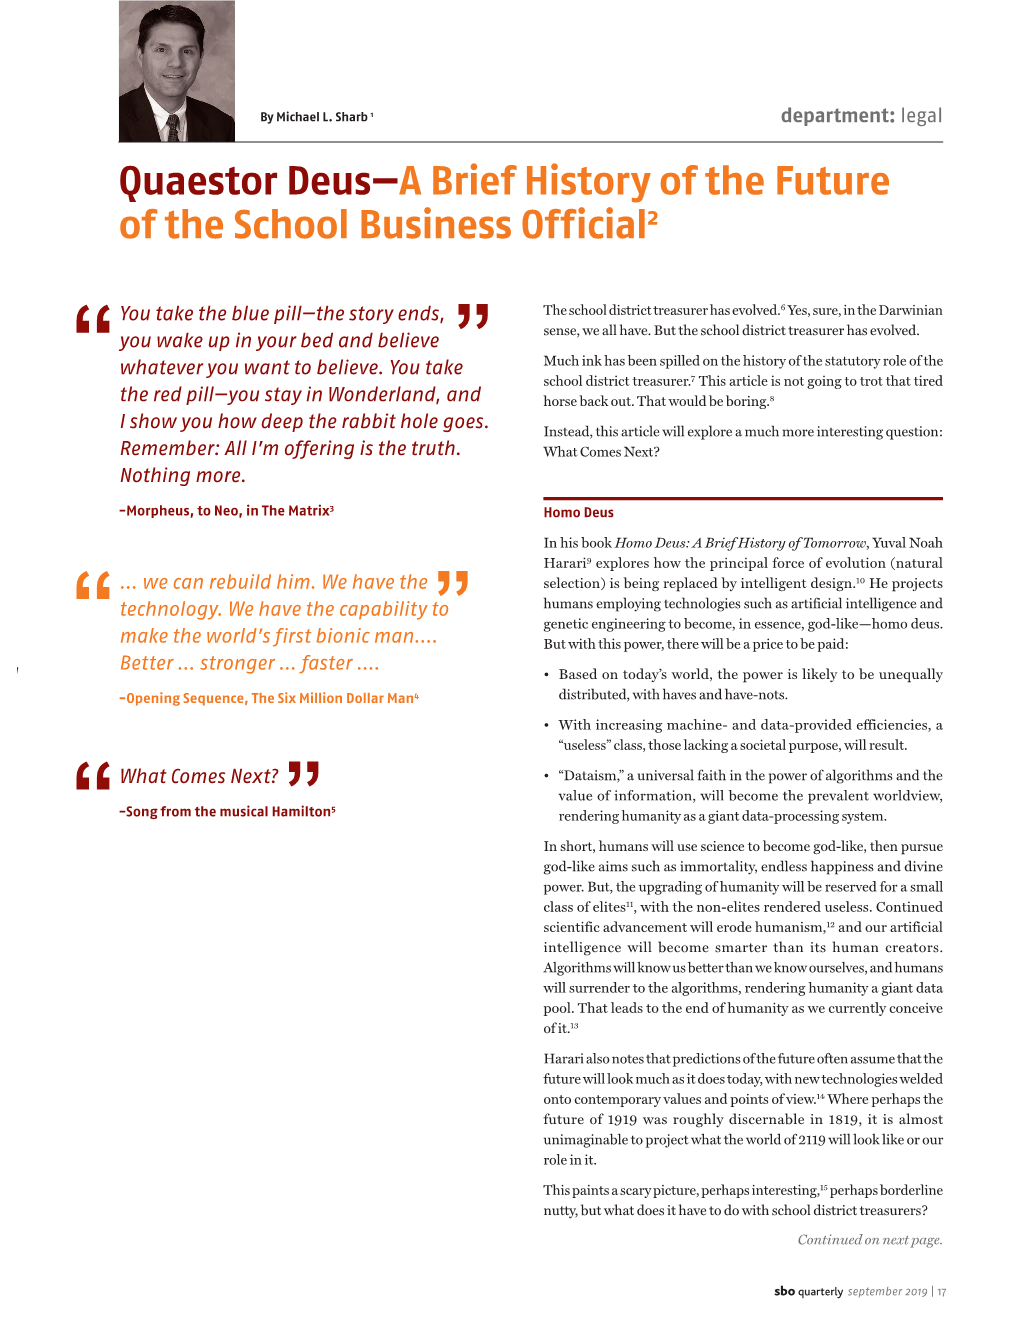 Quaestor Deus—A Brief History of the Future of the School Business Official2